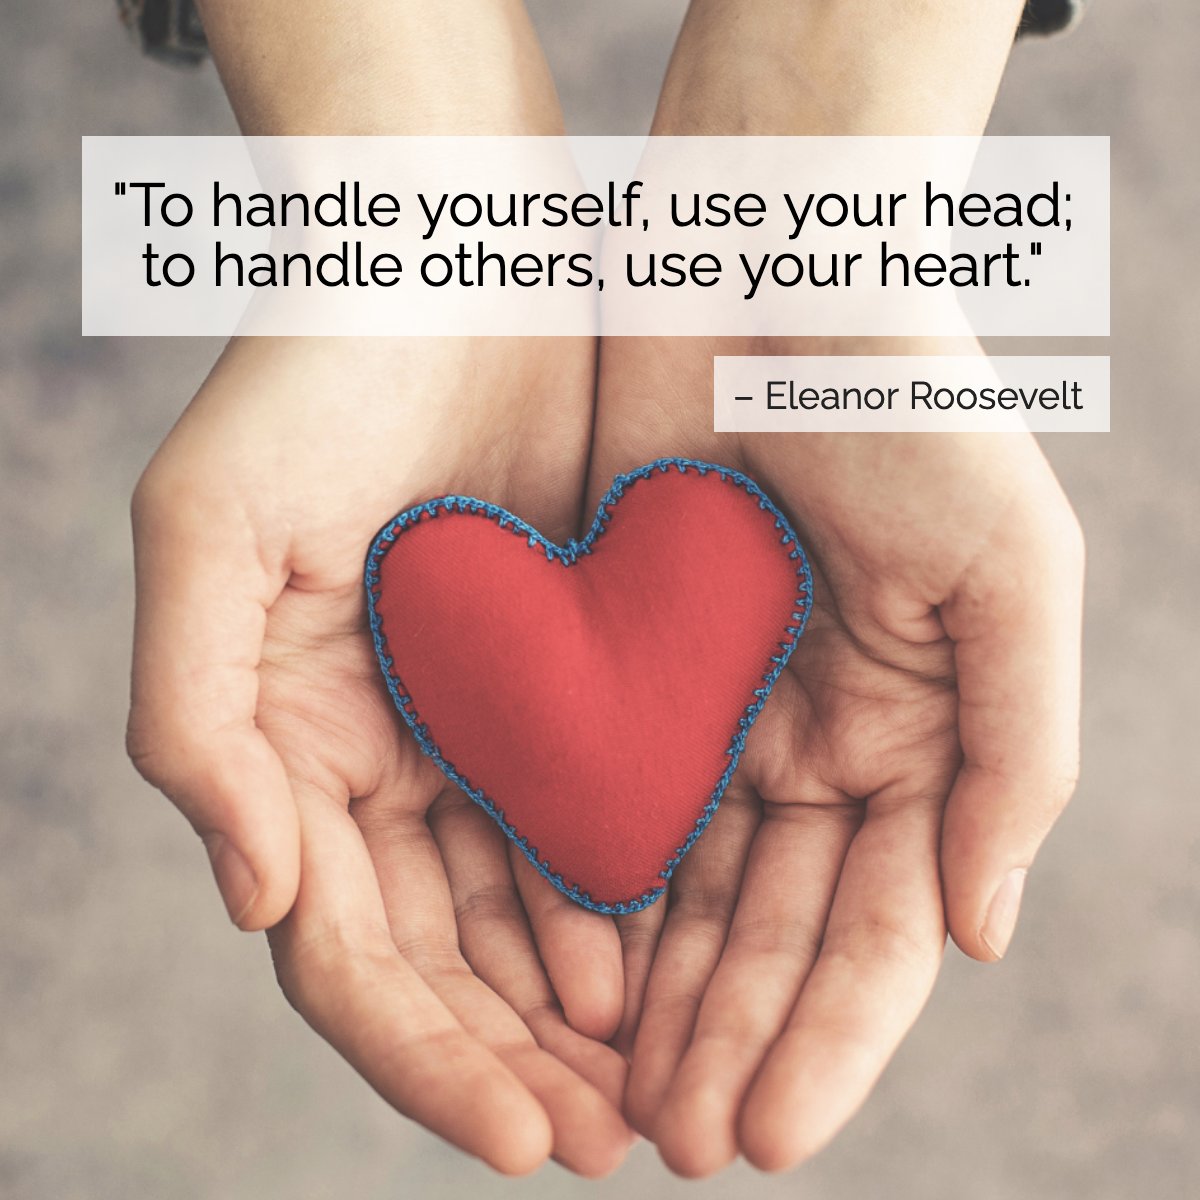 Eleanor Roosevelt was an American political figure, diplomat, and activist. 

She served as the first lady of the United States from 1933 to 1945!

#inspiring #quote #eleanorroosevelt #inspirational 
 #angelagribbinsrealtor #angelagribbinsrealestate #lakenormanrealty